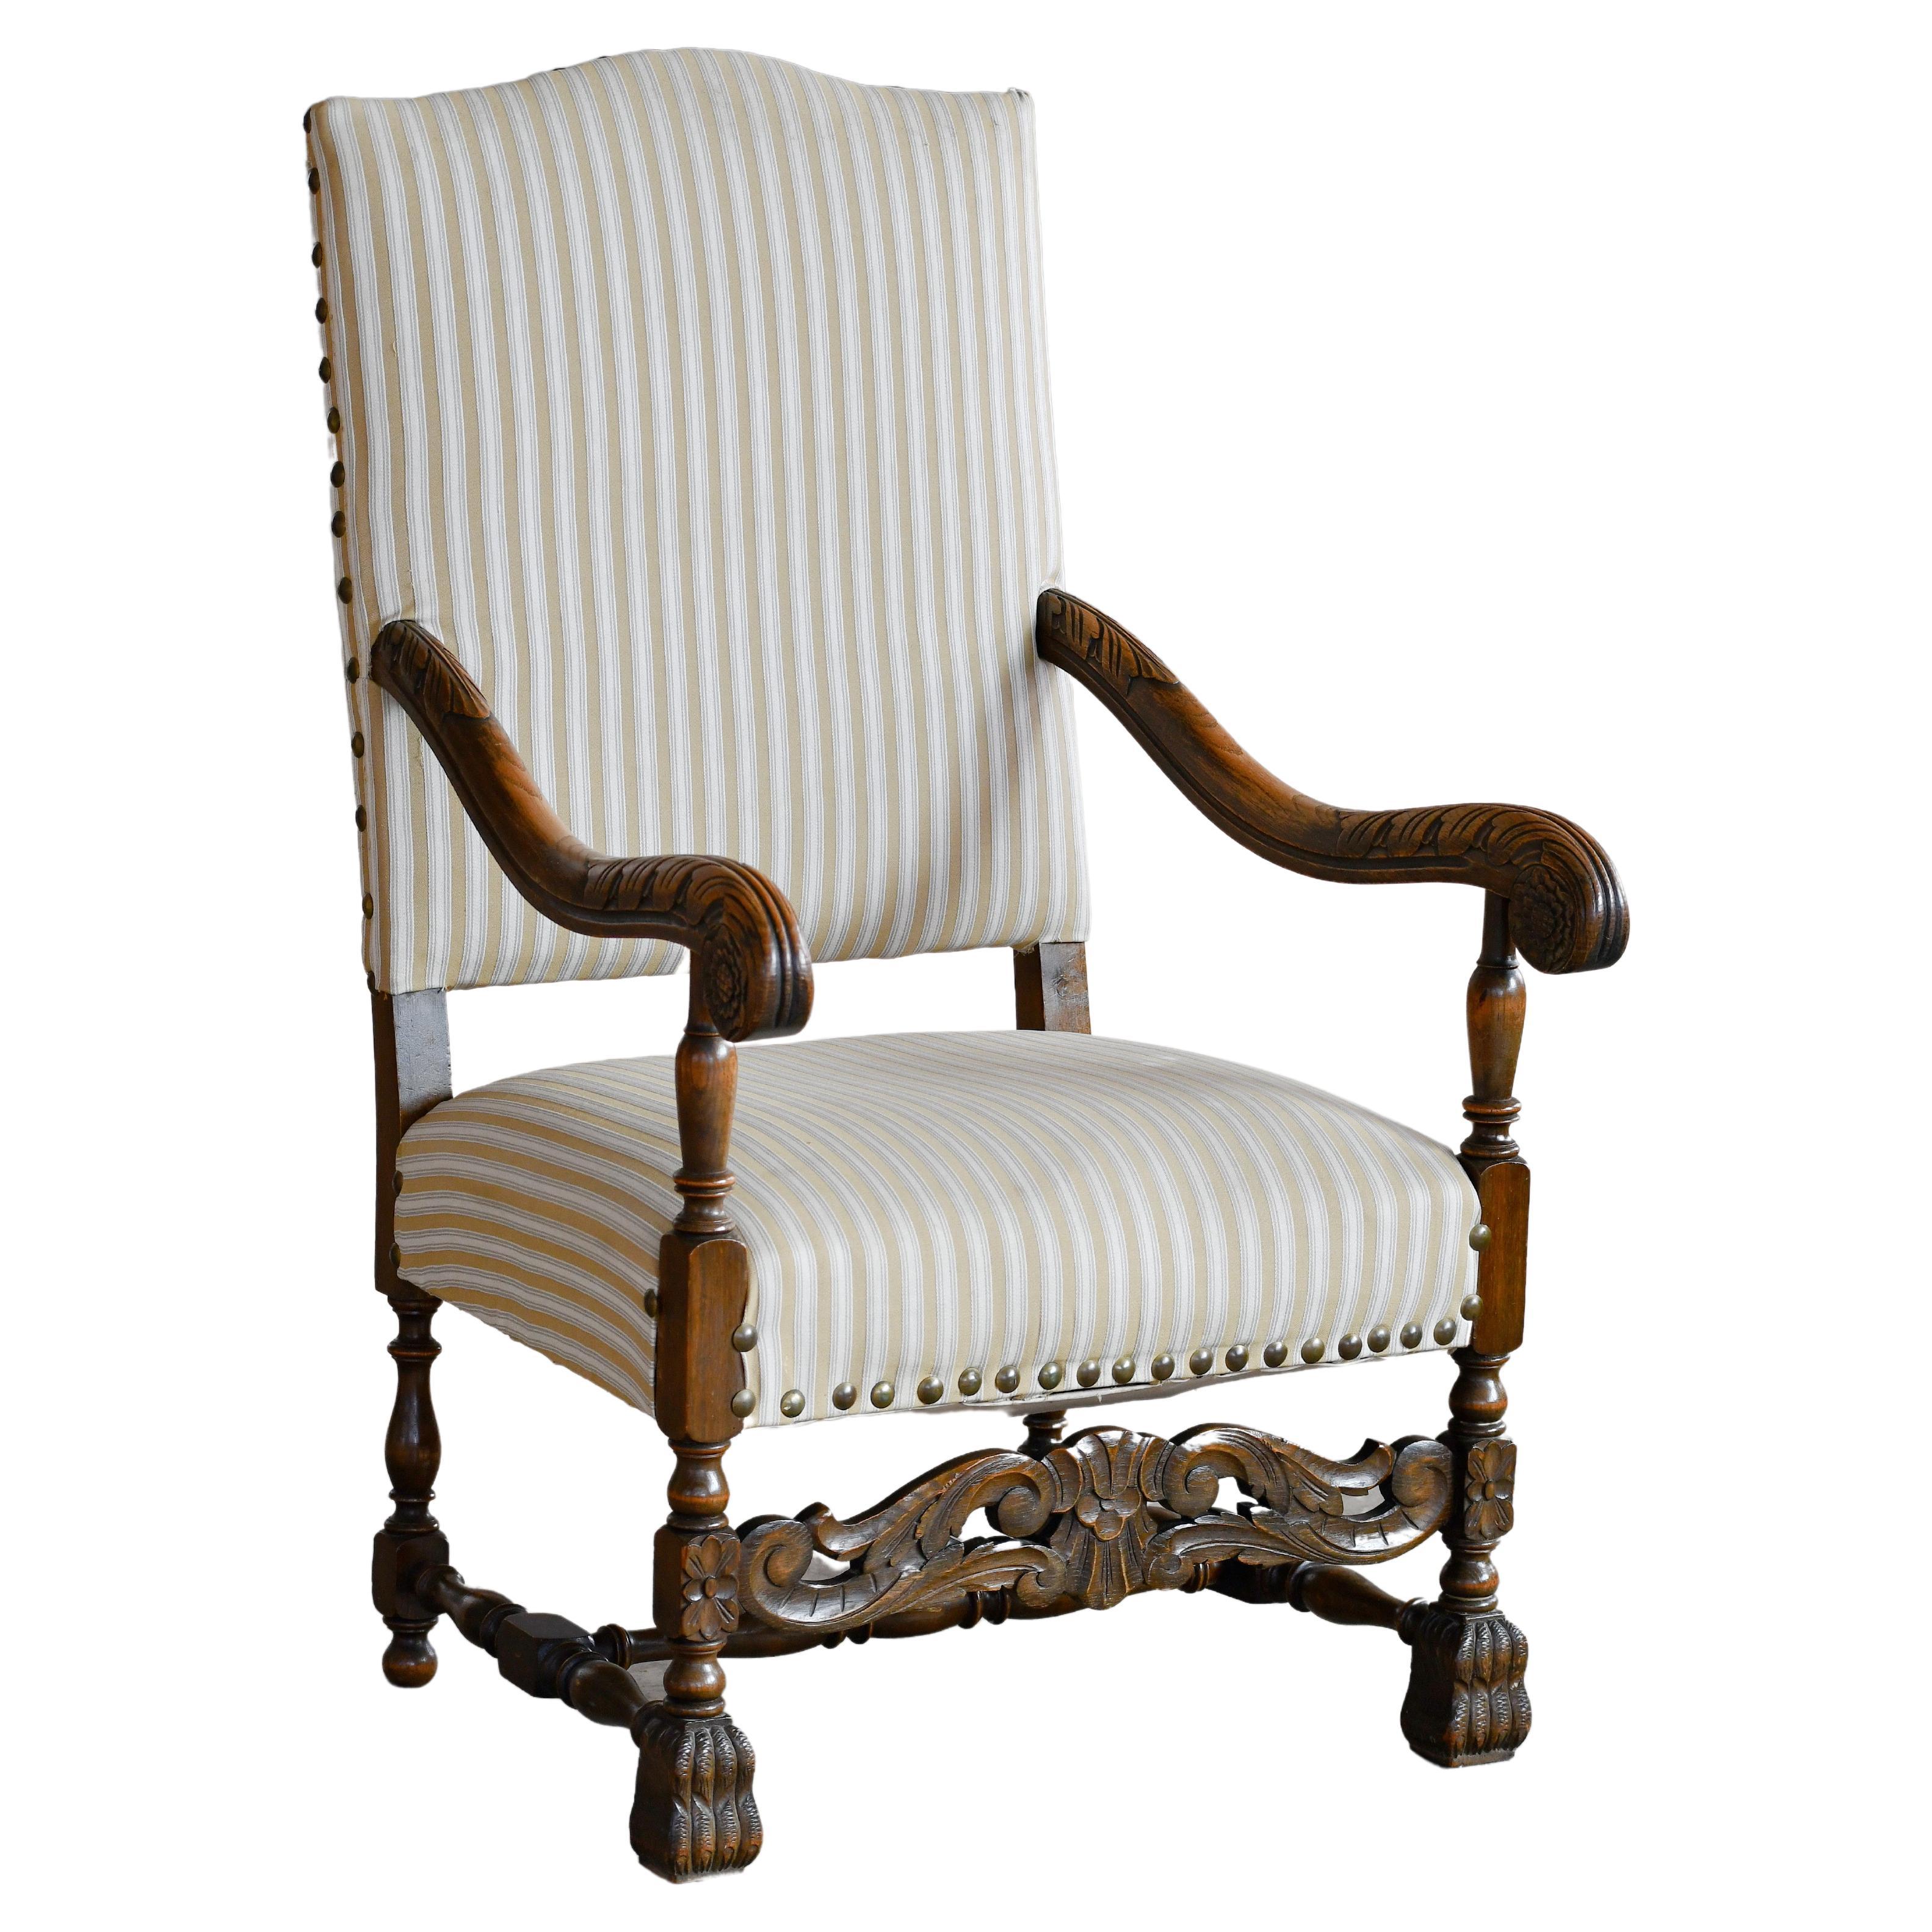 Danish Throne Chair in Carved Oak, circa 1900 Bindesboll Style For Sale